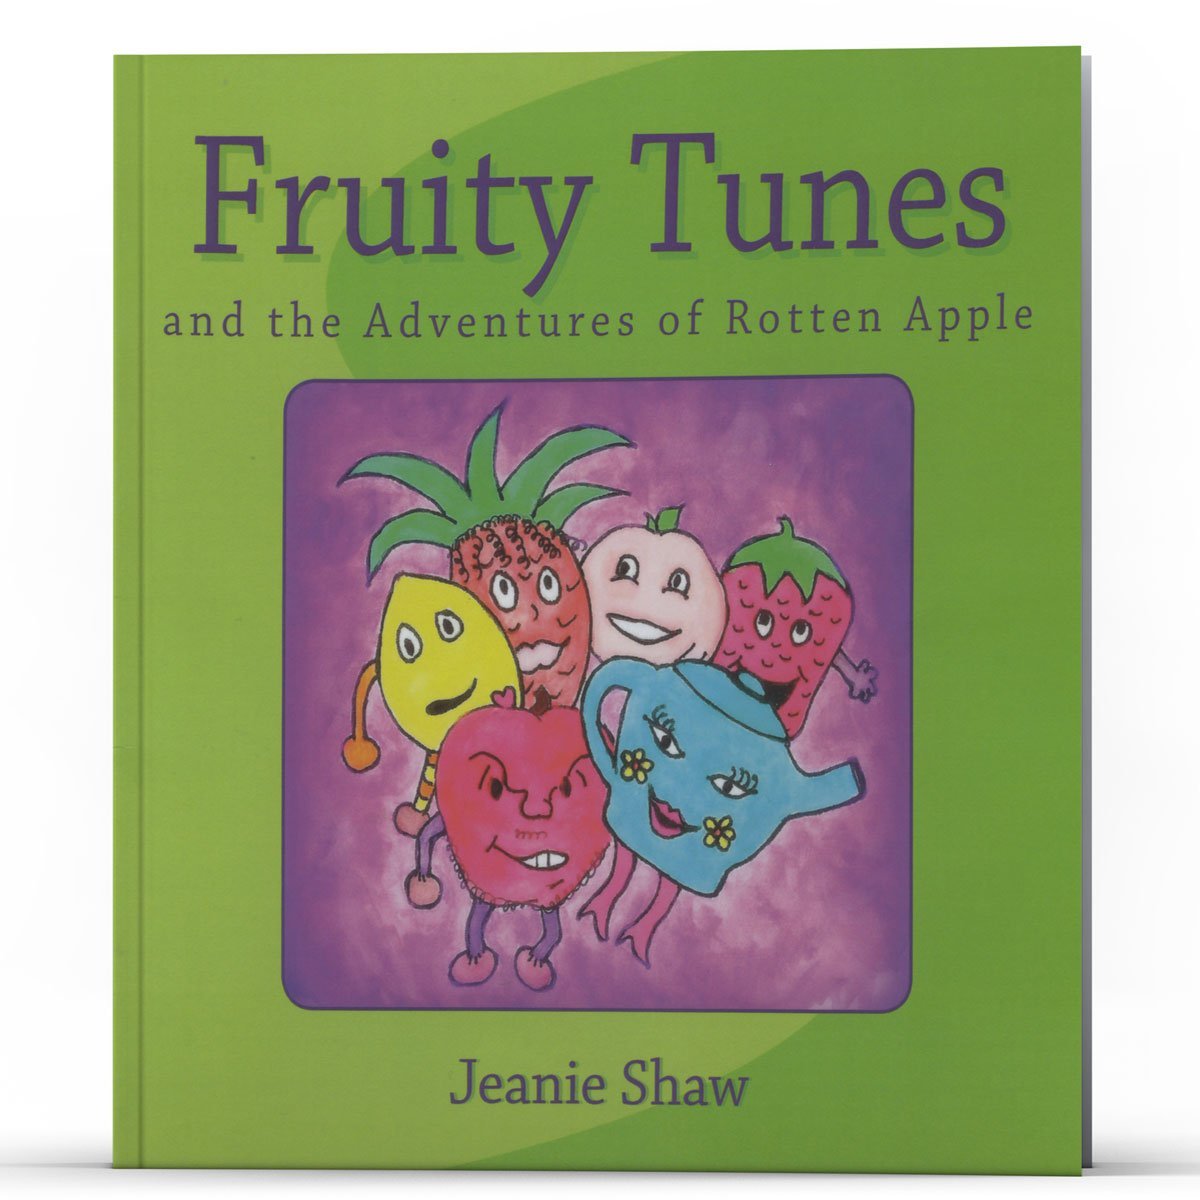 Fruity Tunes and the Adventures of Rotten Apple - Illumination Publishers